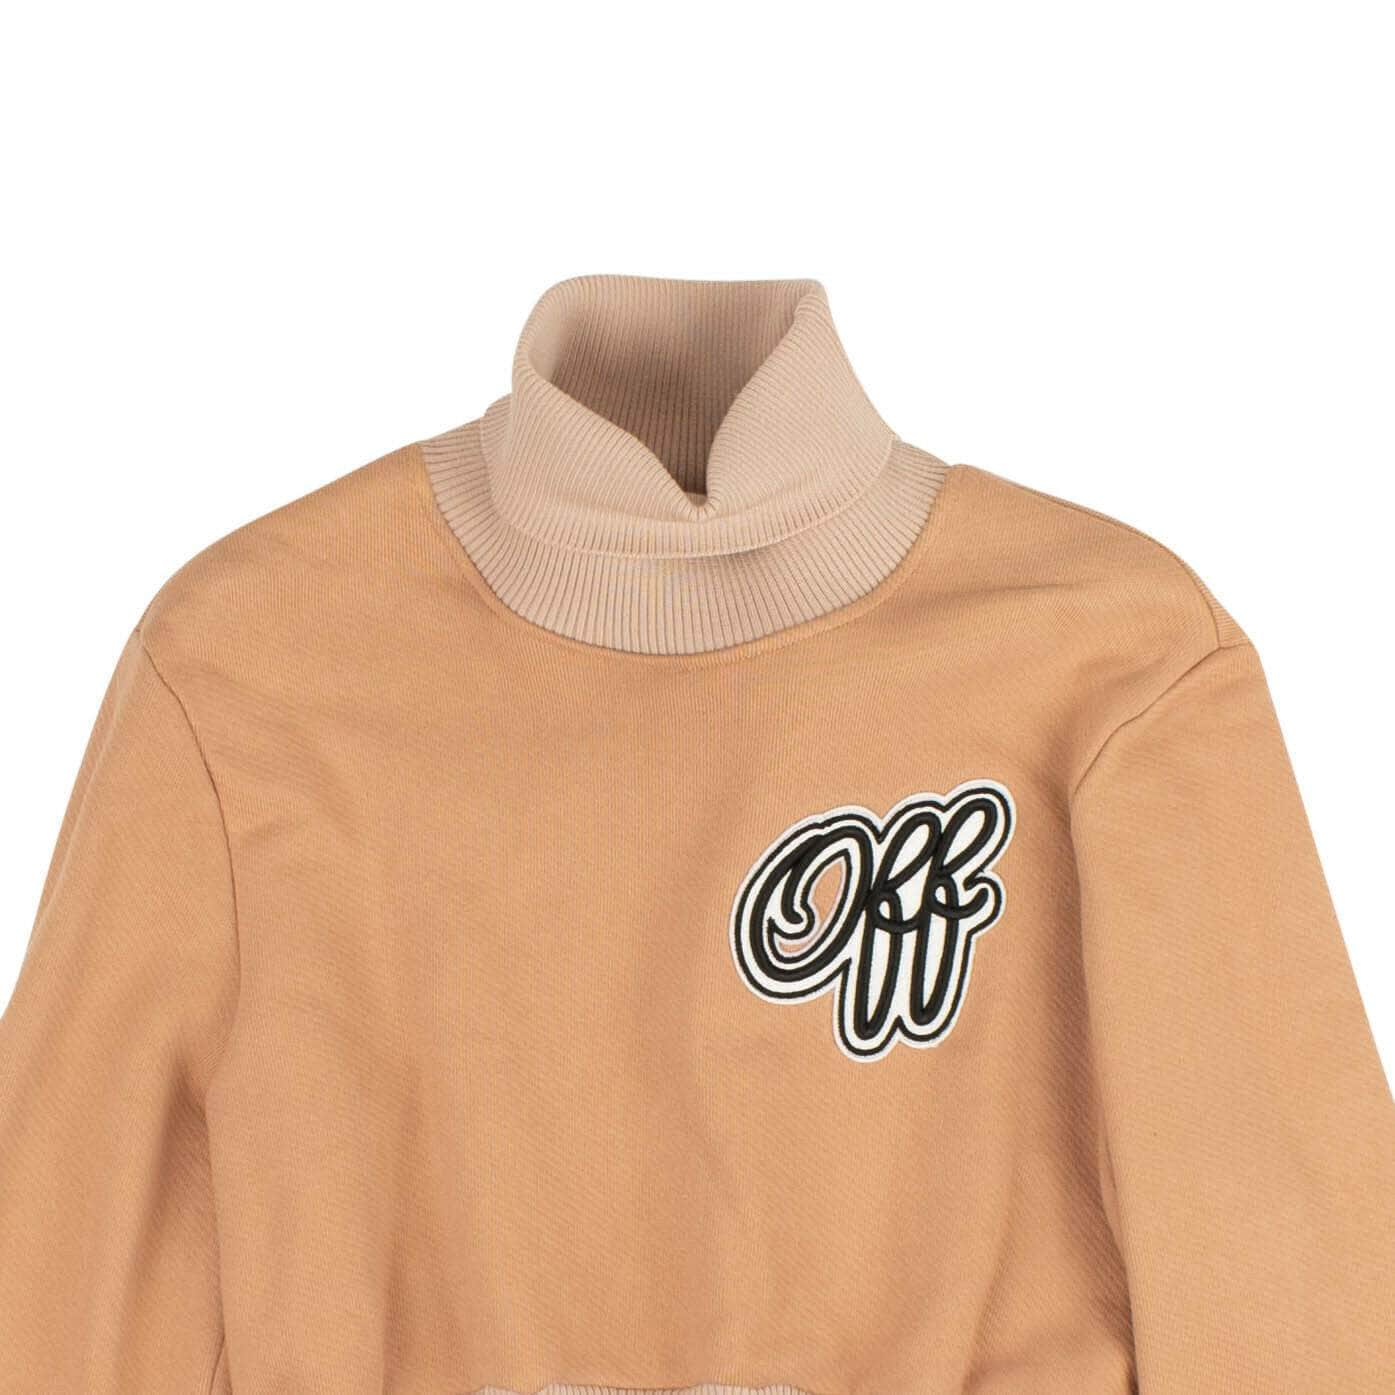 Off-White c/o Virgil Abloh 500-750, channelenable-all, chicmi, couponcollection, gender-womens, main-clothing, off-white-c-o-virgil-abloh, size-40, womens-hoodies-sweatshirts 40 Pink Logo Turtleneck Sweatshirt 82NGG-OW-1807/40 82NGG-OW-1807/40